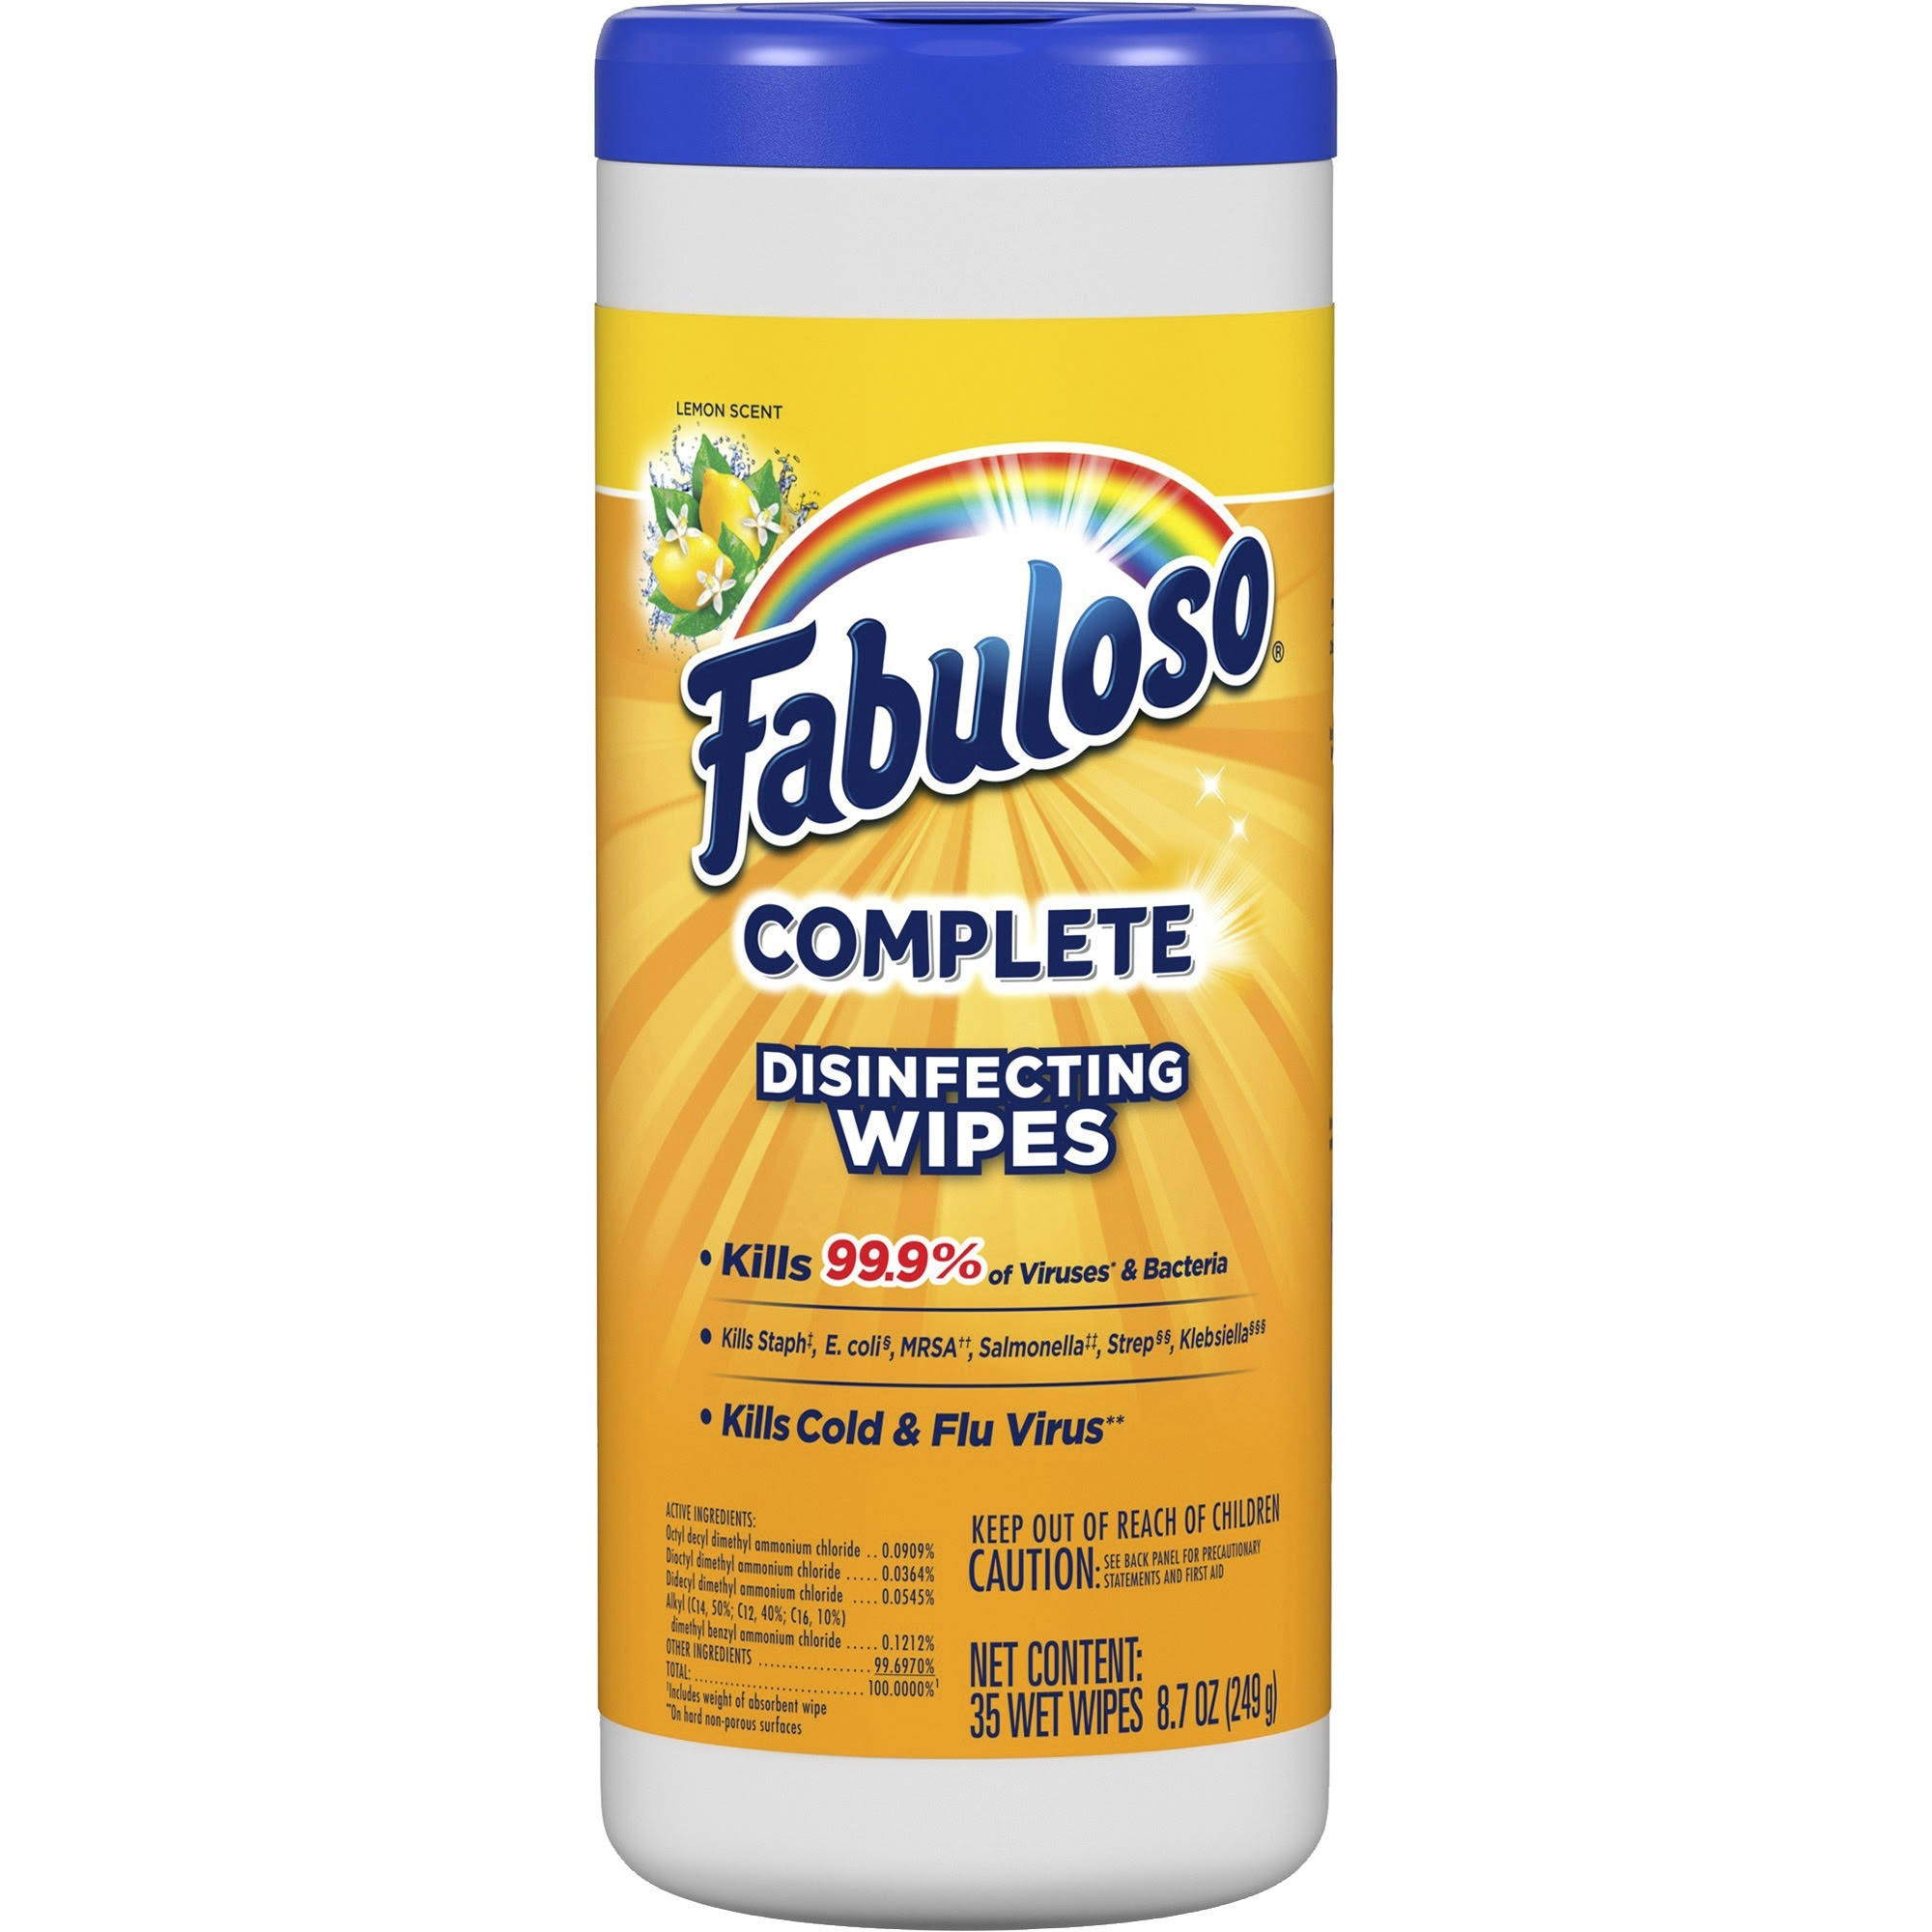 Fabuloso Complete Disinfecting Wipes, Lemon Scent - 35 wipes, 8.7 oz